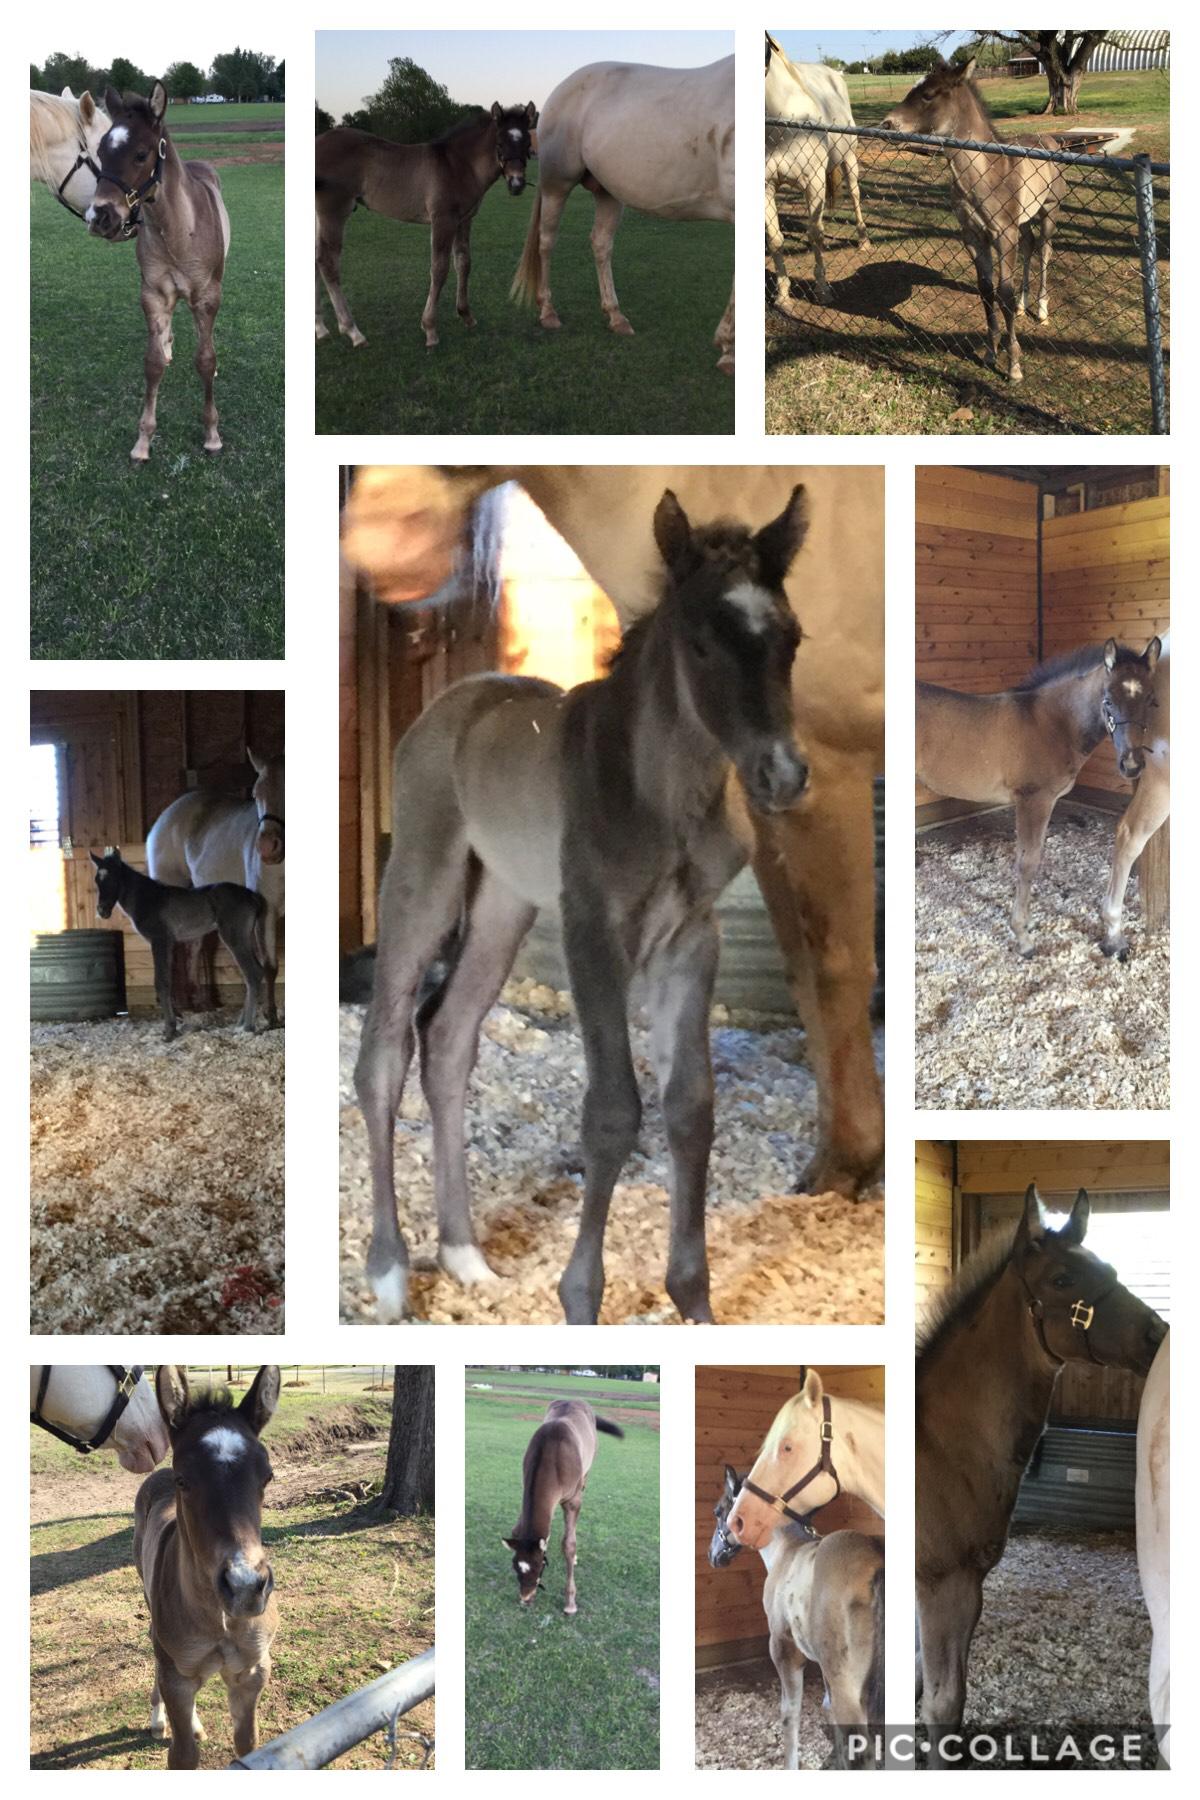 Pistol has grown so min and he is only 2 months old. We named him Pistol because his grandpas name was Gun Slinger. Pistol has already got out of his and his moms pin. The biggest picture is a picture of the day he was born. He has grown so much❤️